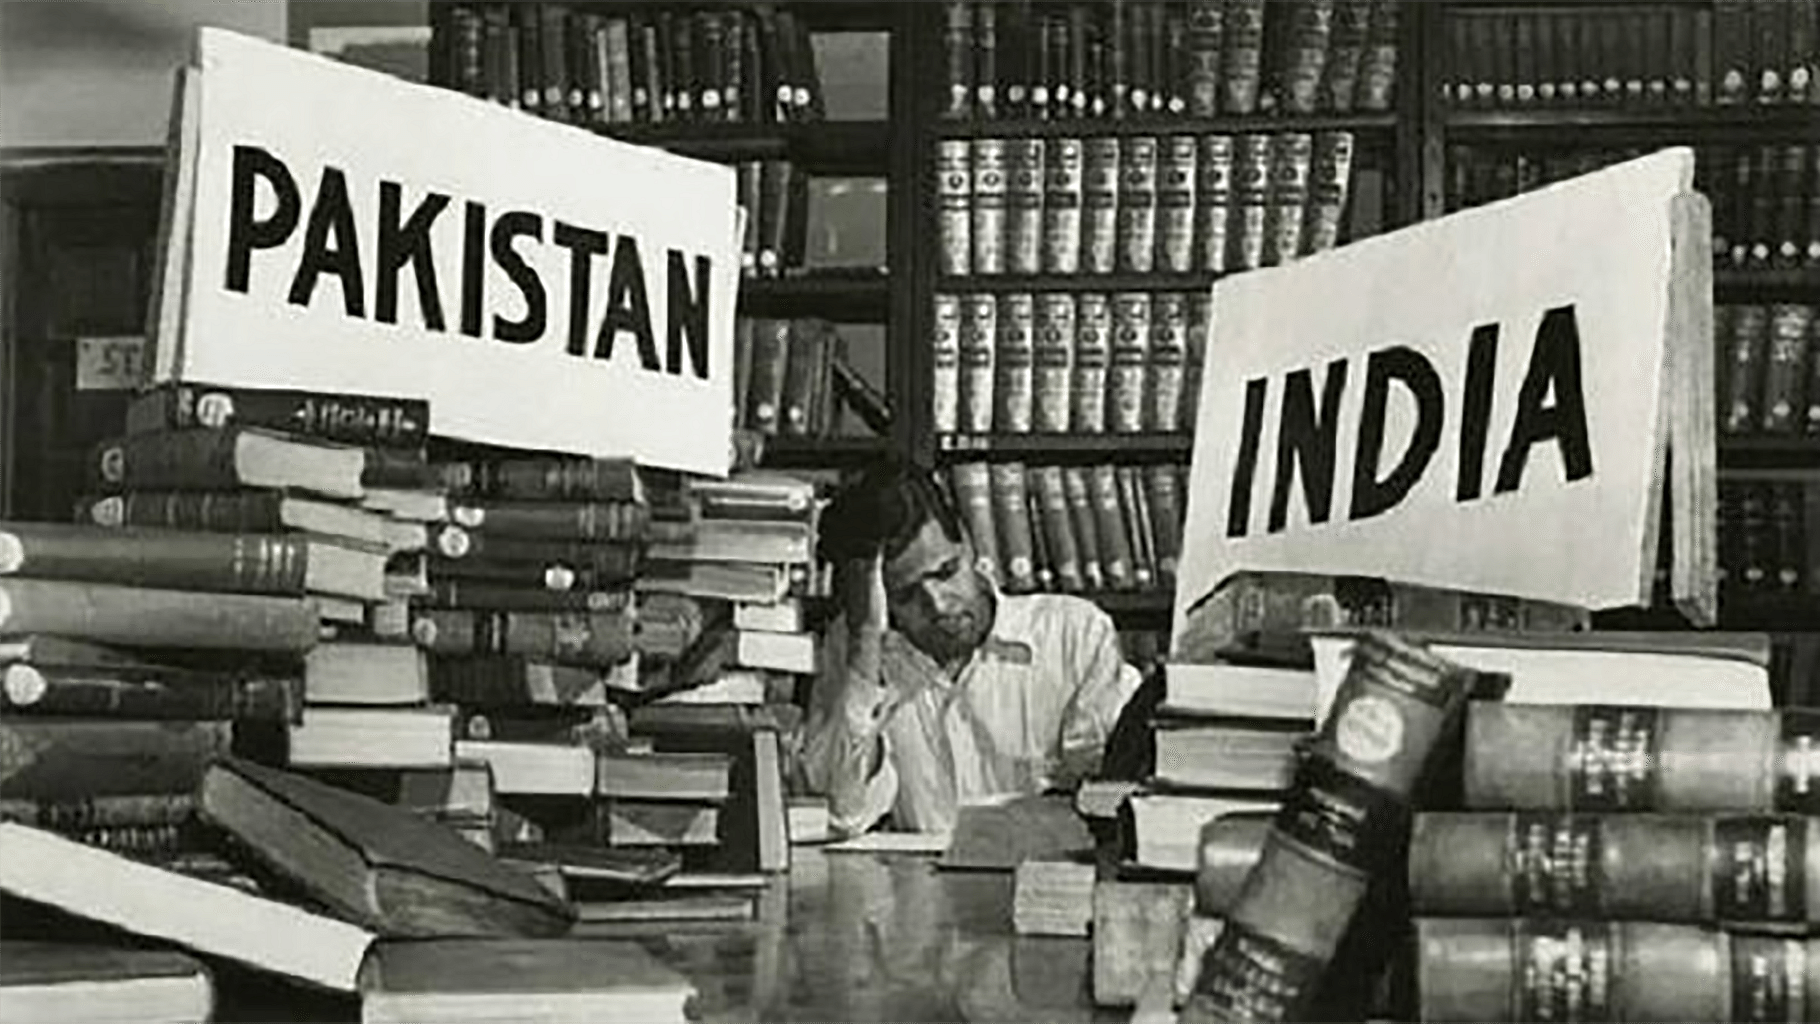 Calcutta Library after partition of India and Pakistan. (Photo: <a href="https://twitter.com/IndiaHistorypic/status/702210892016939012">Twitter</a>)